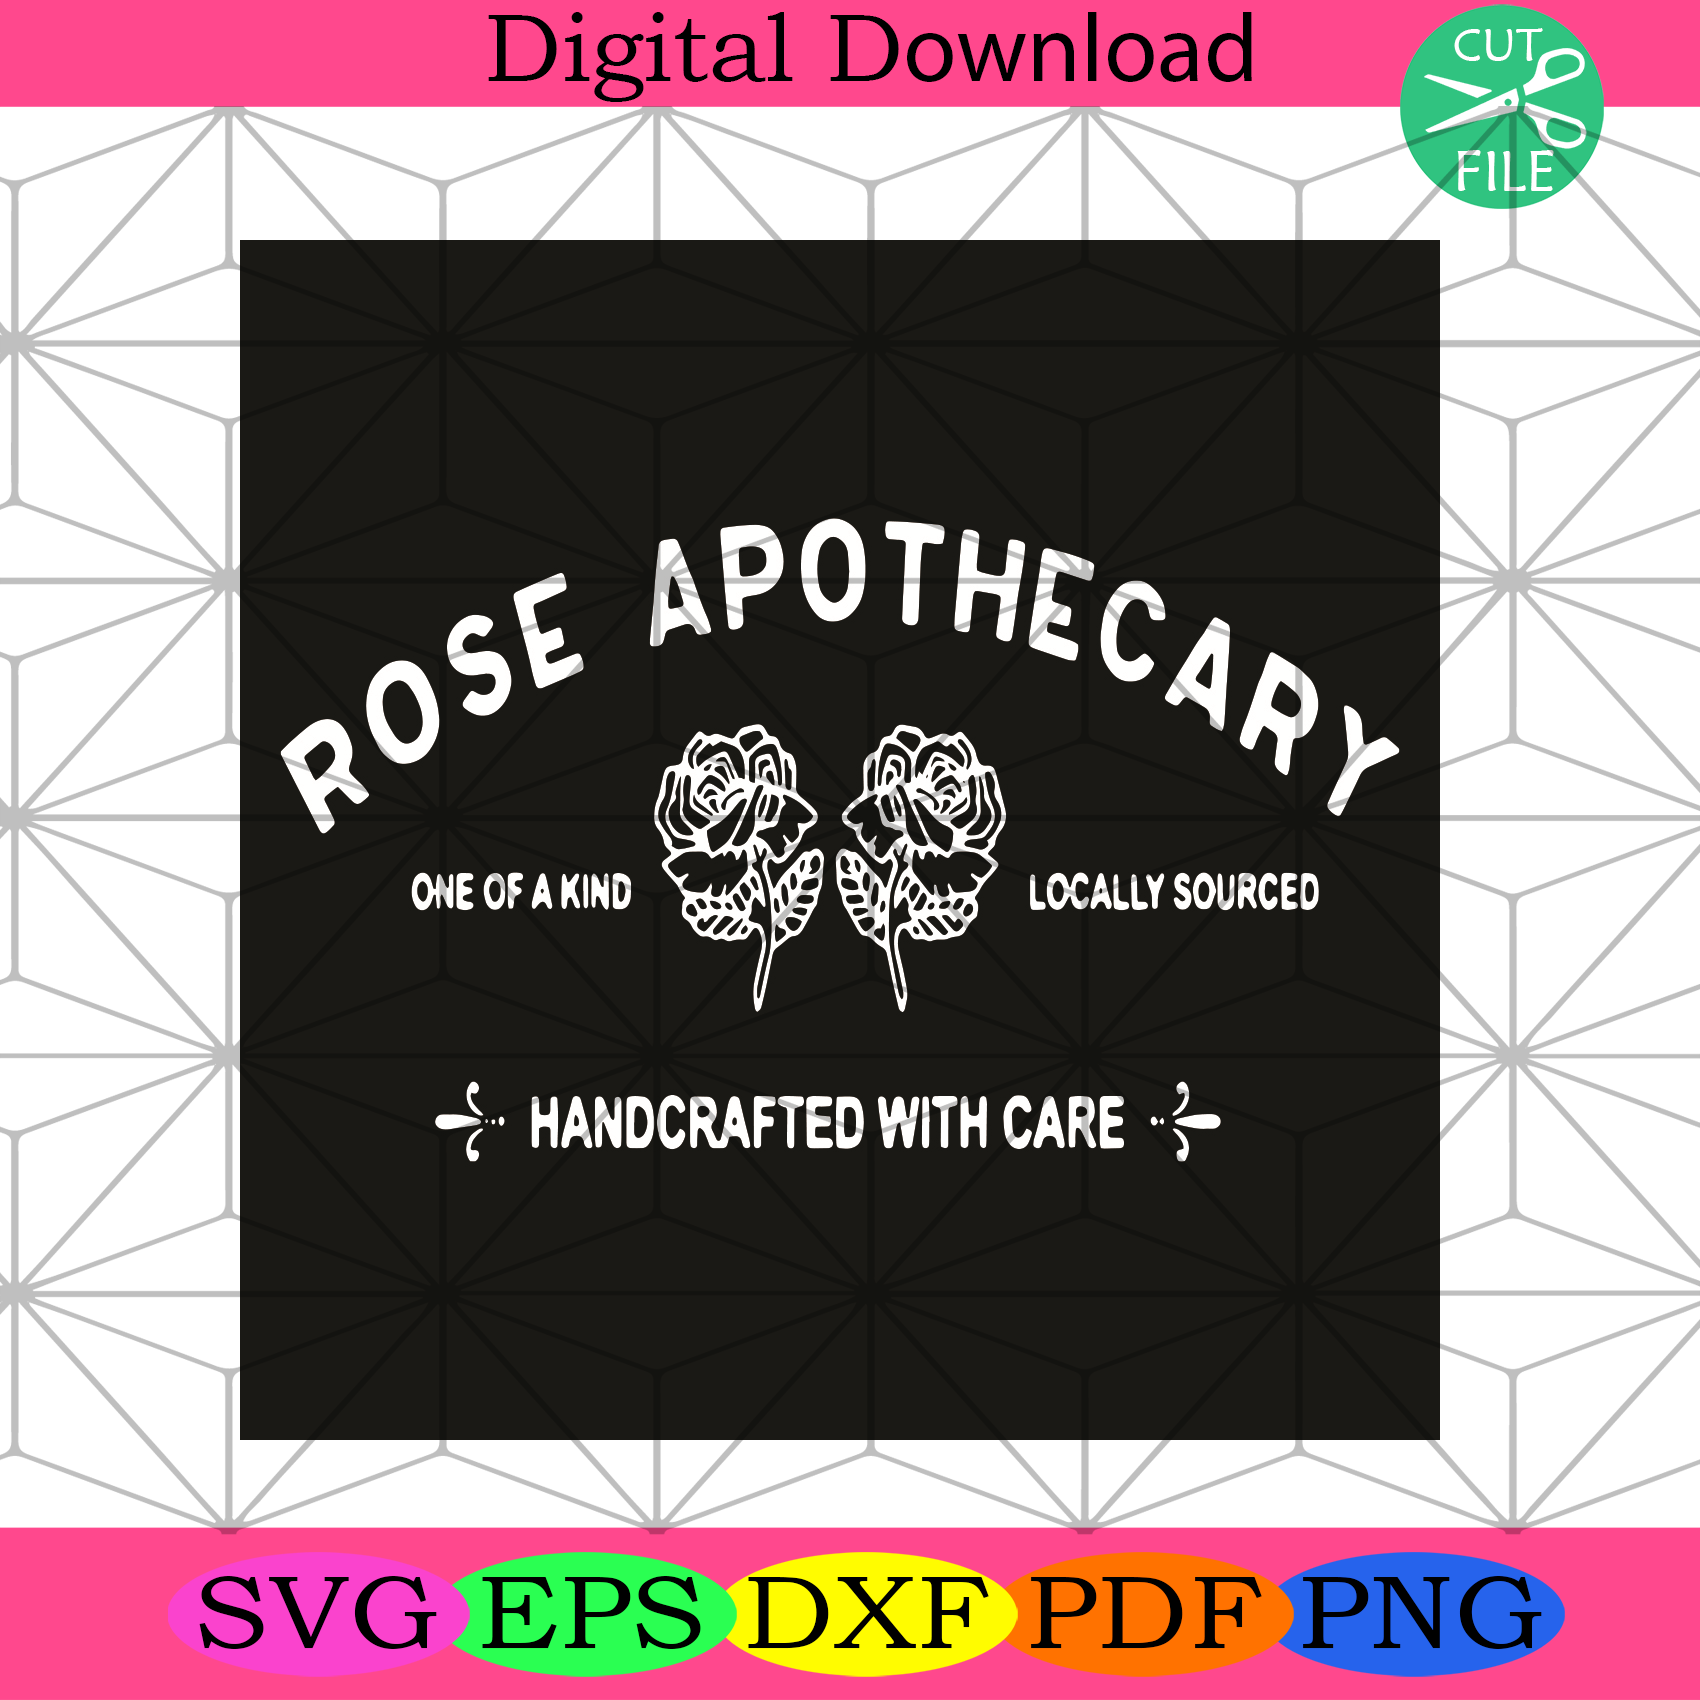 Rose Apothecary One A Kind Locally Sourced Handcrafted With Care Svg